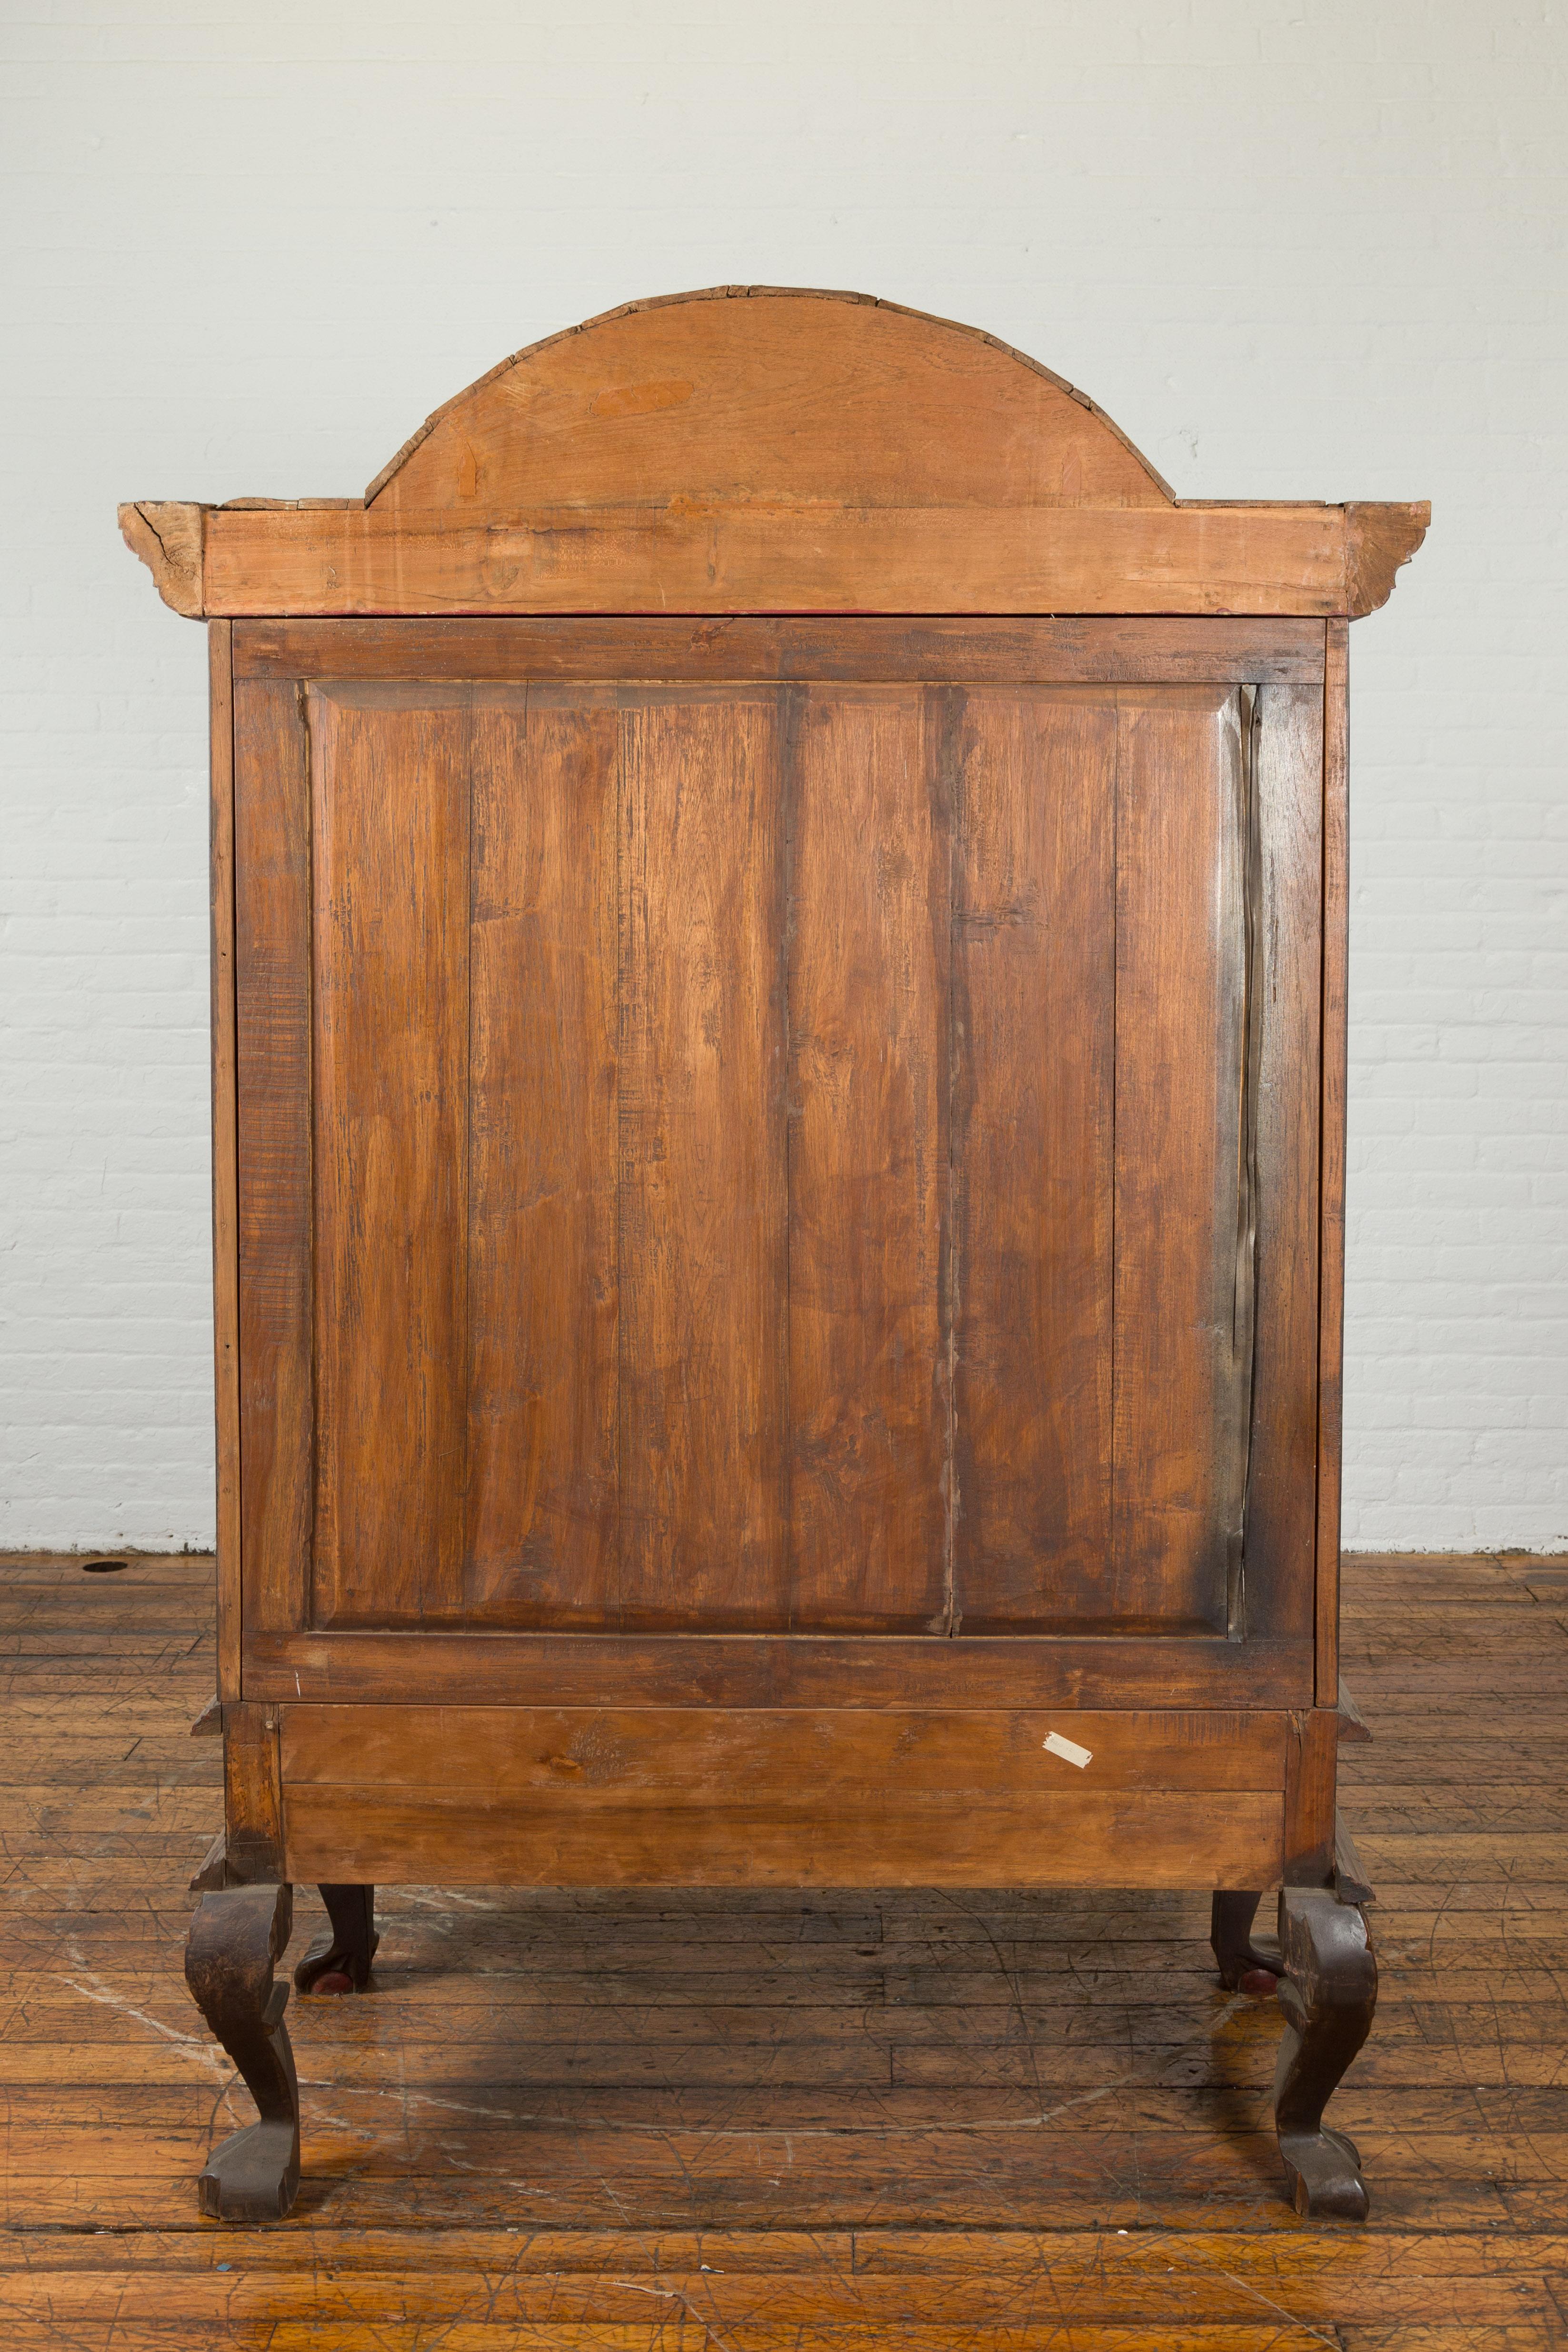 Dutch Colonial Early 20th Century Cabinet with Bonnet Top and Cabriole Legs For Sale 7